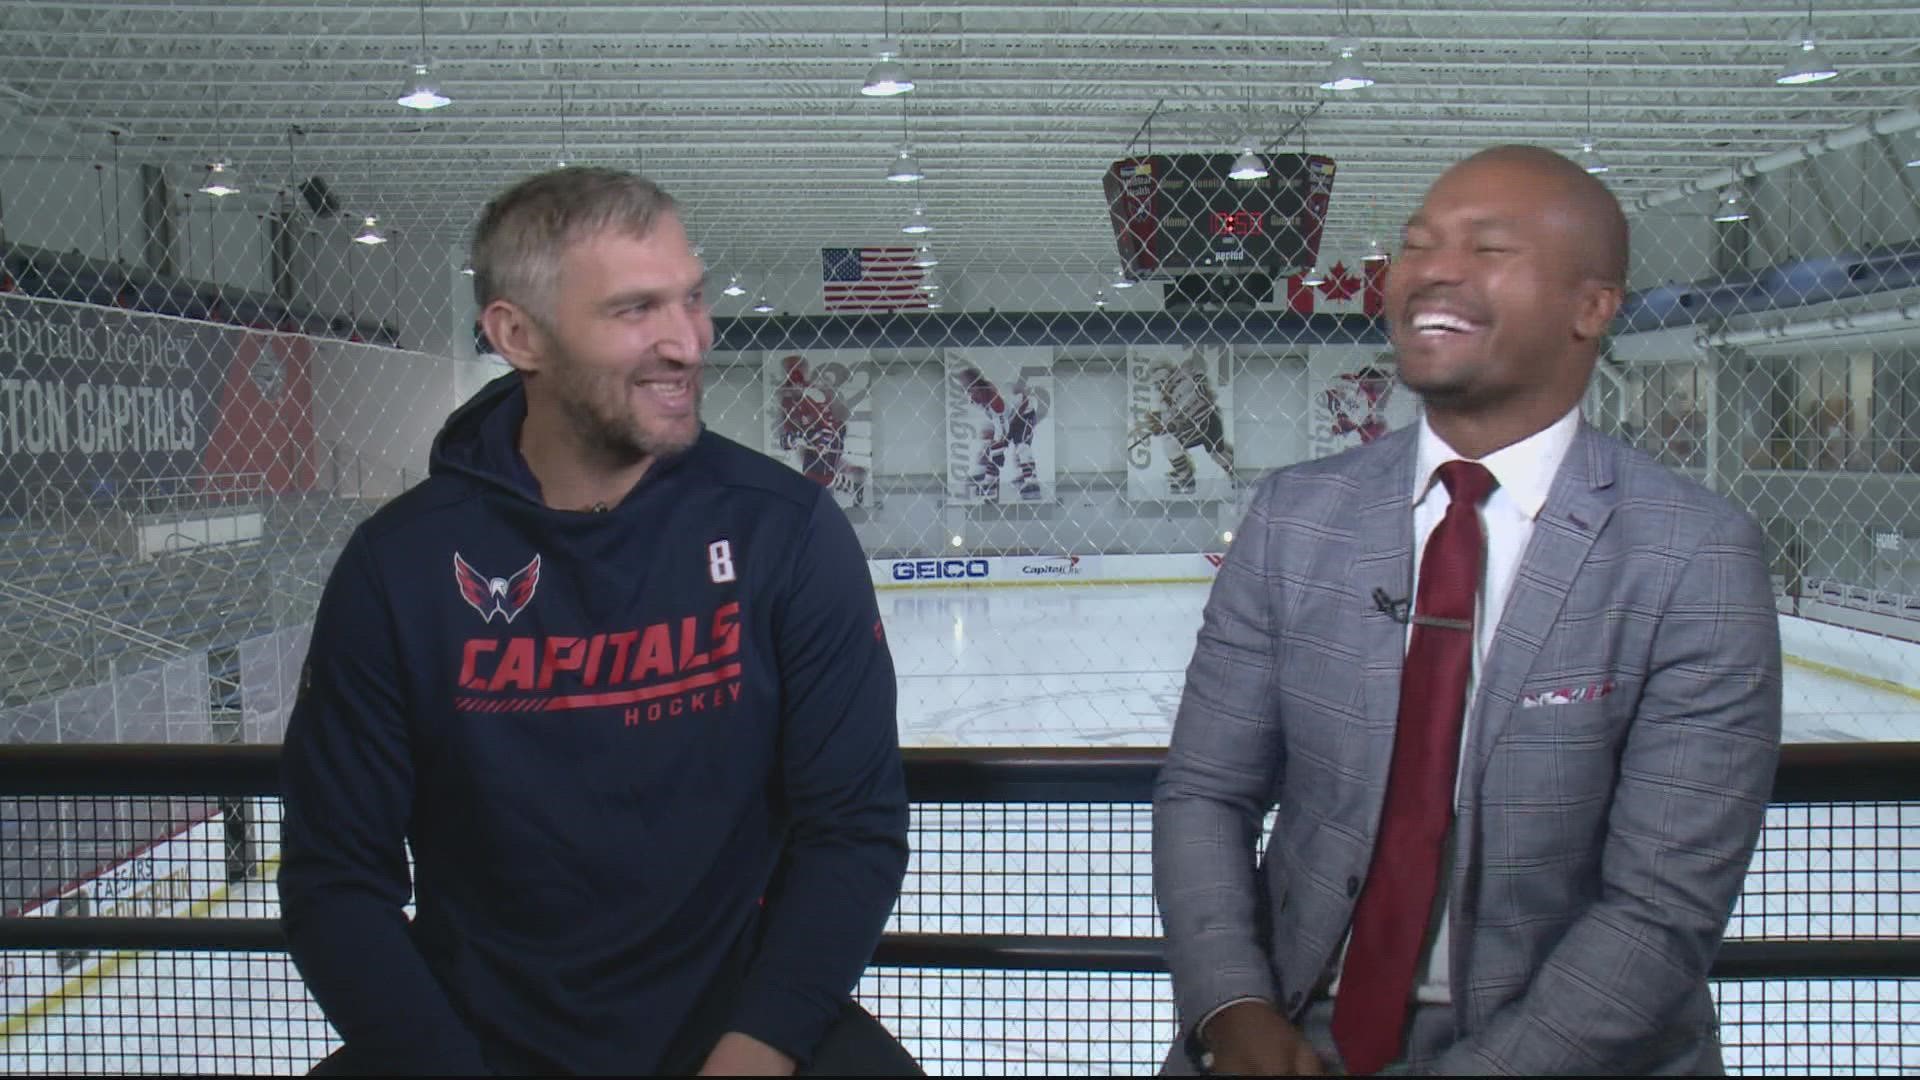 Sharla McBride and Darren Haynes speak with the Capitols on their upcoming season